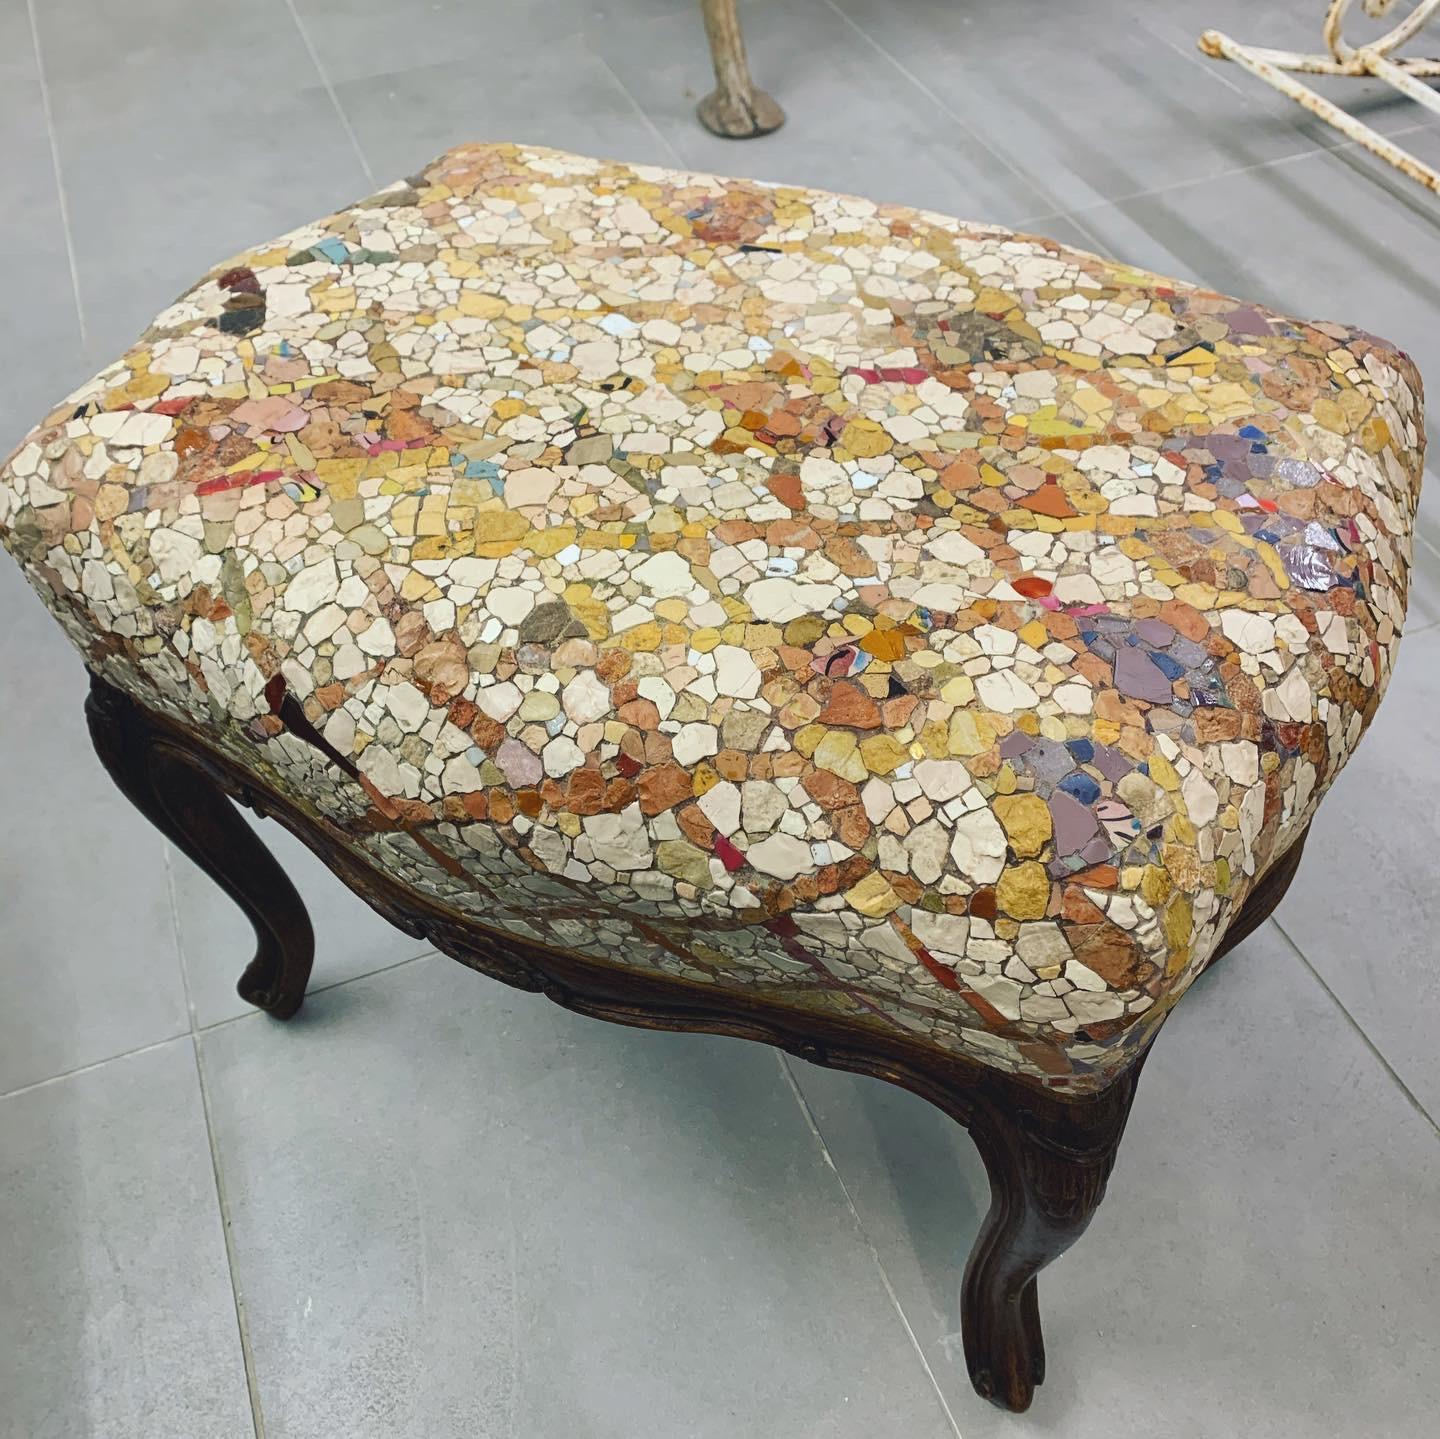 Sgabello Rombi antique wood stool by Yukiko Nagai
Dimensions: D 40 x W 53 x H 40 cm
Material: Antique wood stool, Marble, Natural stone, Styrofoam, Glass fiber,
Resin, Cement, Stucco
Weight: 10 kg 
All pieces are handmade, so the colours and